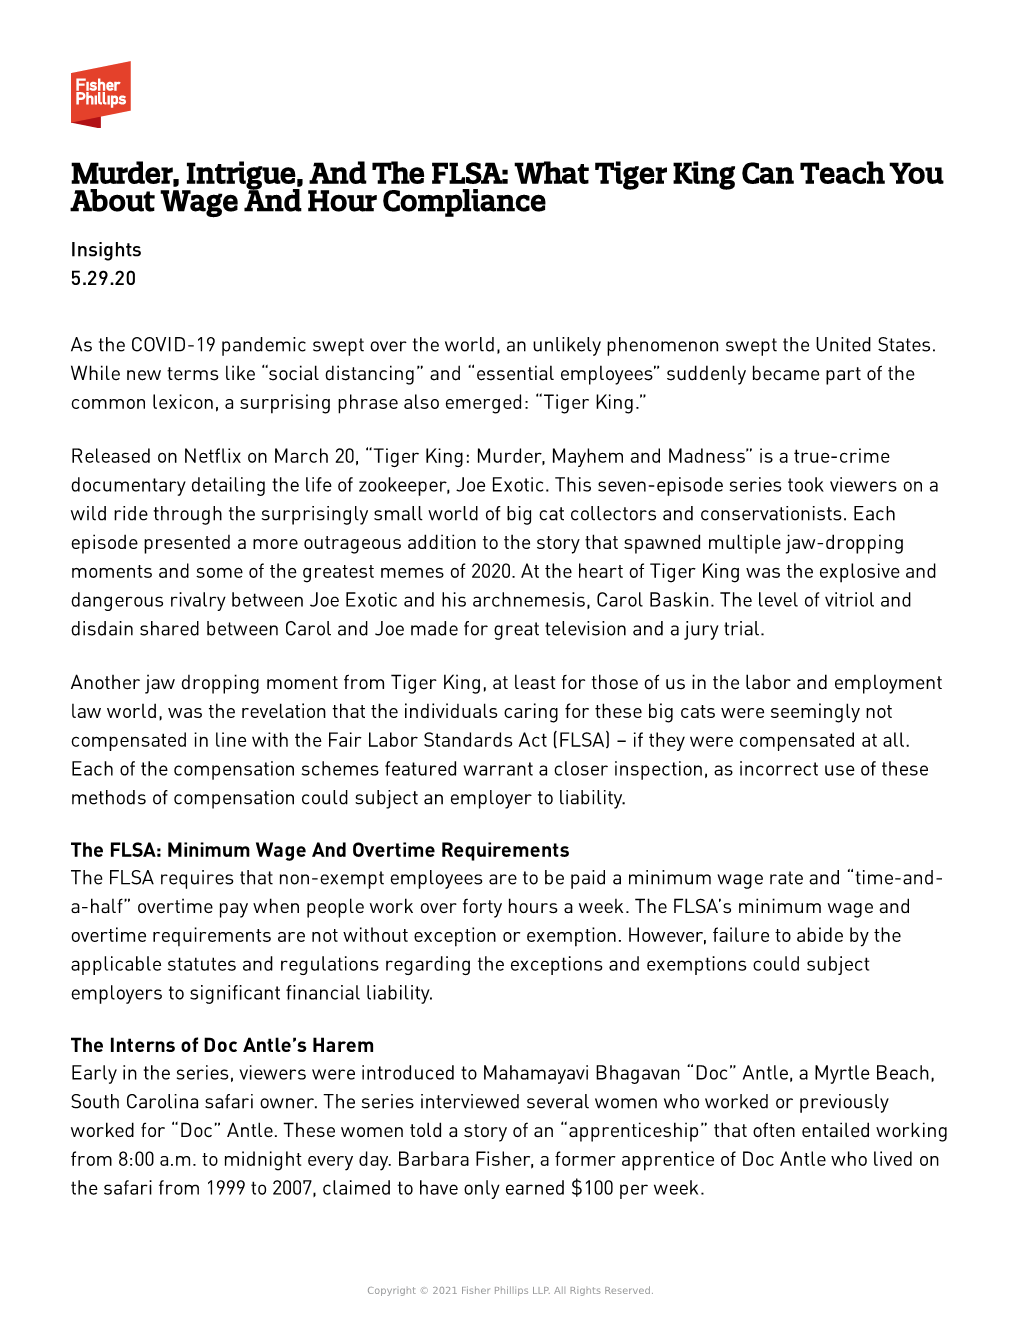 Murder, Intrigue, and the FLSA: What Tiger King Can Teach You About Wage and Hour Compliance Insights 5.29.20